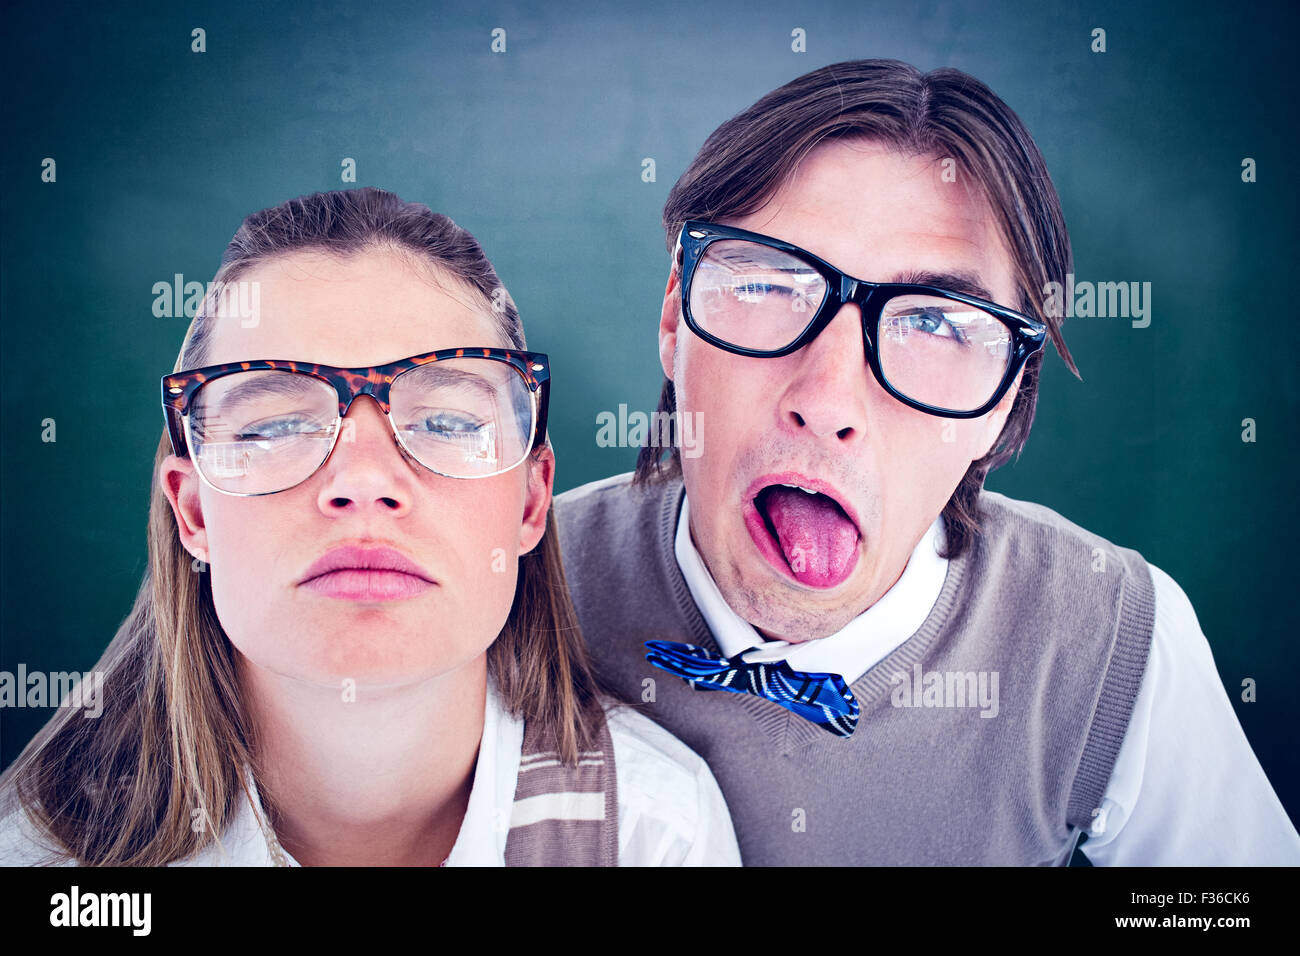 Composite image of funny geeky hipsters grimacing Stock Photo